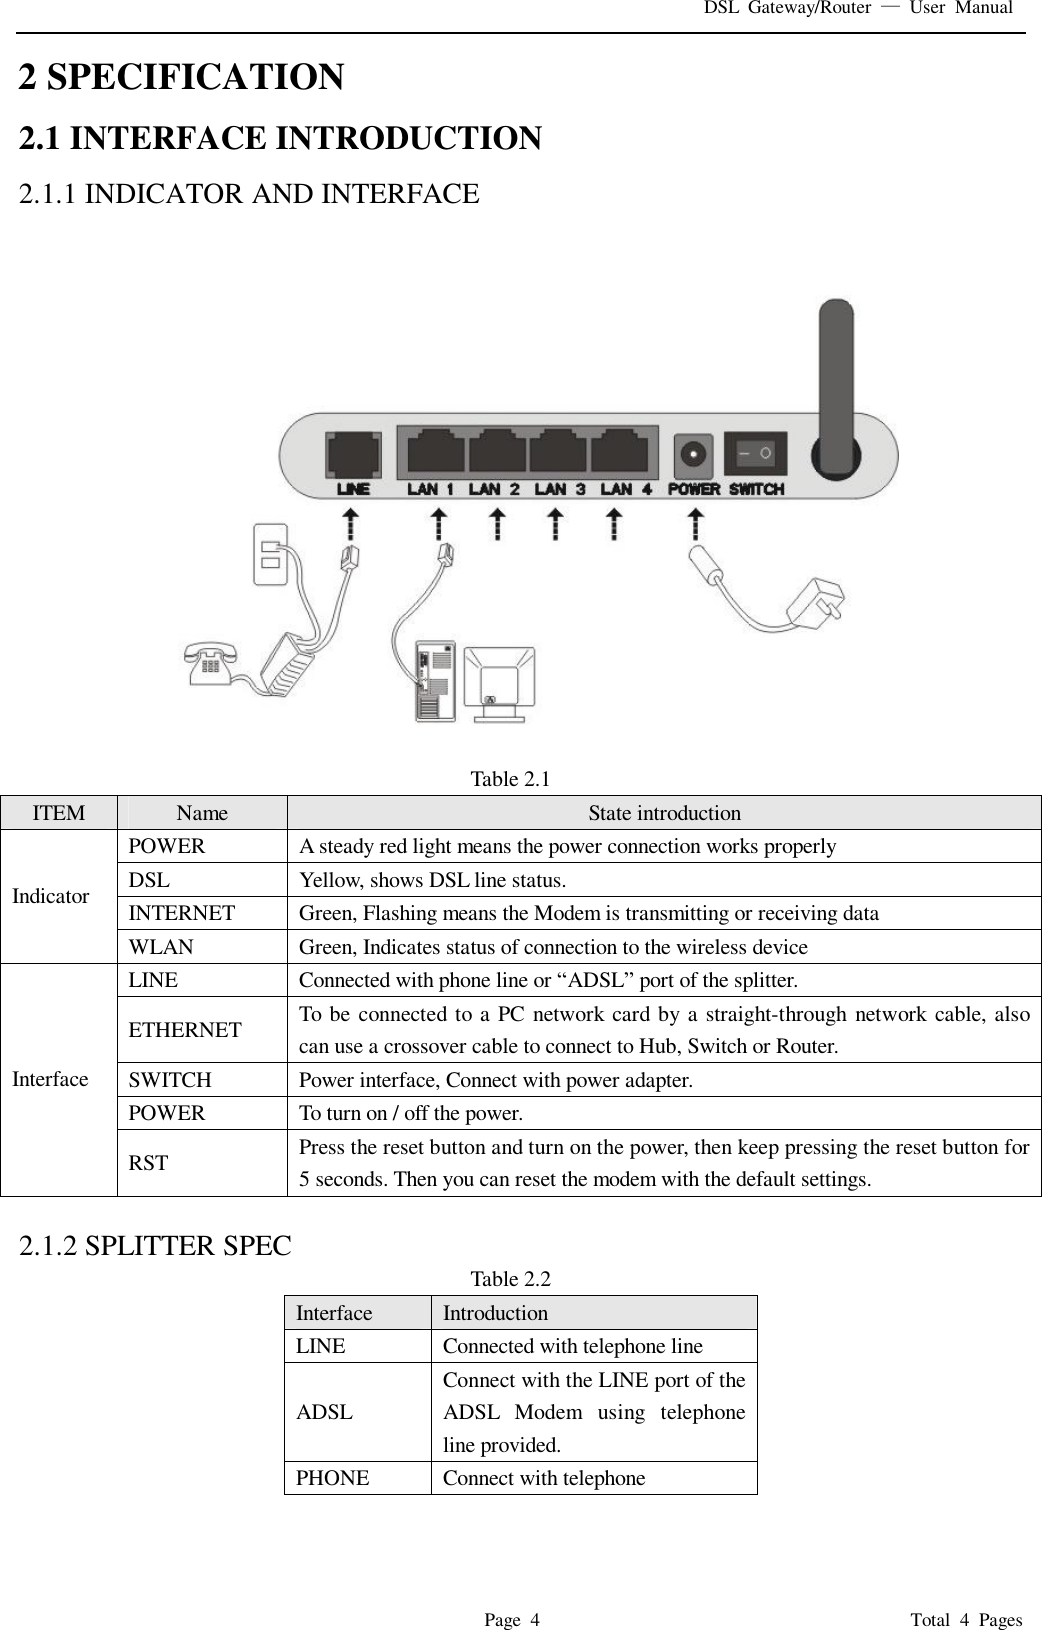 DSL Gateway/Router  — User Manual  Page 4                                       Total 4 Pages 2 SPECIFICATION 2.1 INTERFACE INTRODUCTION 2.1.1 INDICATOR AND INTERFACE   Table 2.1 ITEM  Name  State introduction POWER  A steady red light means the power connection works properly DSL  Yellow, shows DSL line status. INTERNET  Green, Flashing means the Modem is transmitting or receiving data Indicator WLAN  Green, Indicates status of connection to the wireless device LINE  Connected with phone line or “ADSL” port of the splitter.  ETHERNET  To be connected to a PC network card by a straight-through network cable, also can use a crossover cable to connect to Hub, Switch or Router. SWITCH  Power interface, Connect with power adapter. POWER  To turn on / off the power. Interface RST  Press the reset button and turn on the power, then keep pressing the reset button for 5 seconds. Then you can reset the modem with the default settings.  2.1.2 SPLITTER SPEC Table 2.2 Interface   Introduction LINE  Connected with telephone line  ADSL Connect with the LINE port of the ADSL Modem using telephone line provided. PHONE  Connect with telephone  